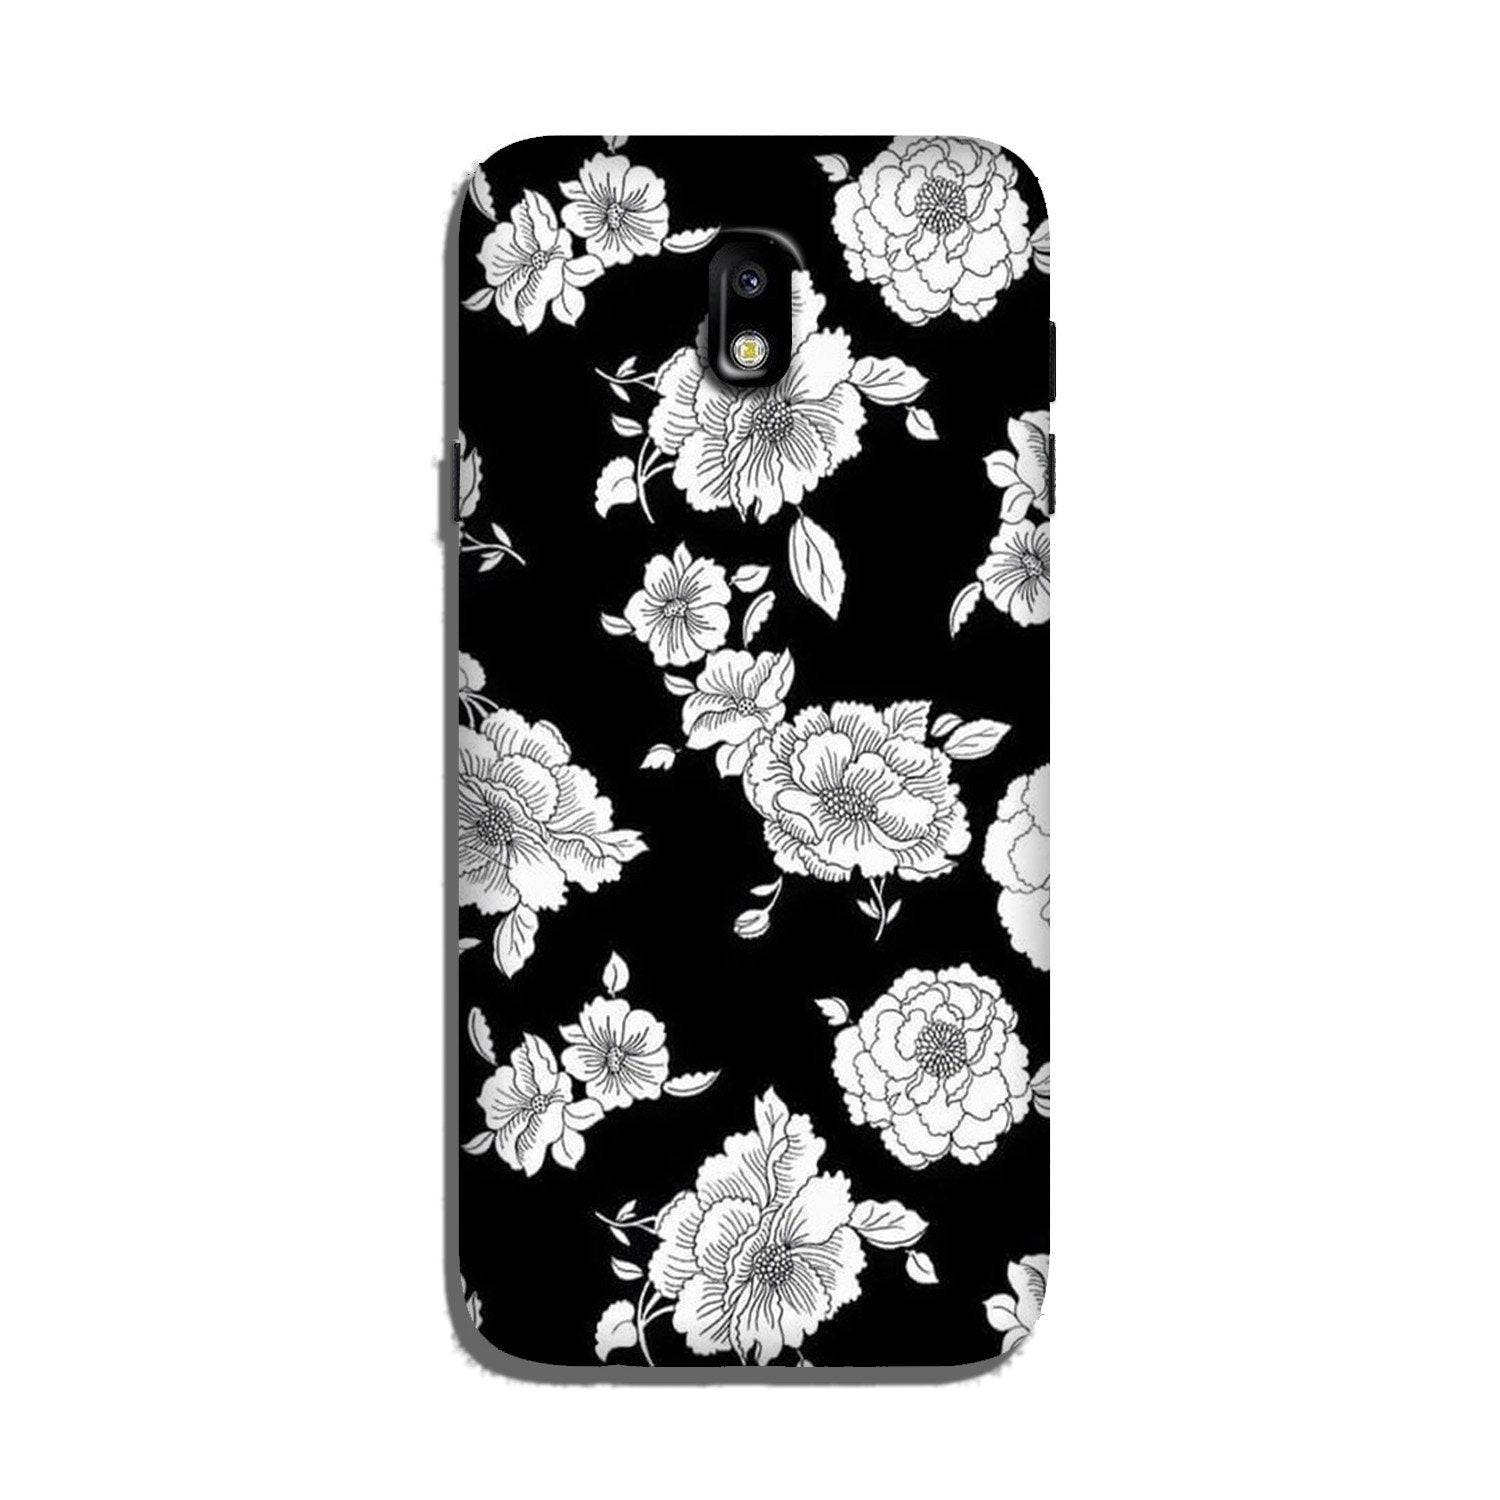 White flowers Black Background Case for Galaxy J7 Pro